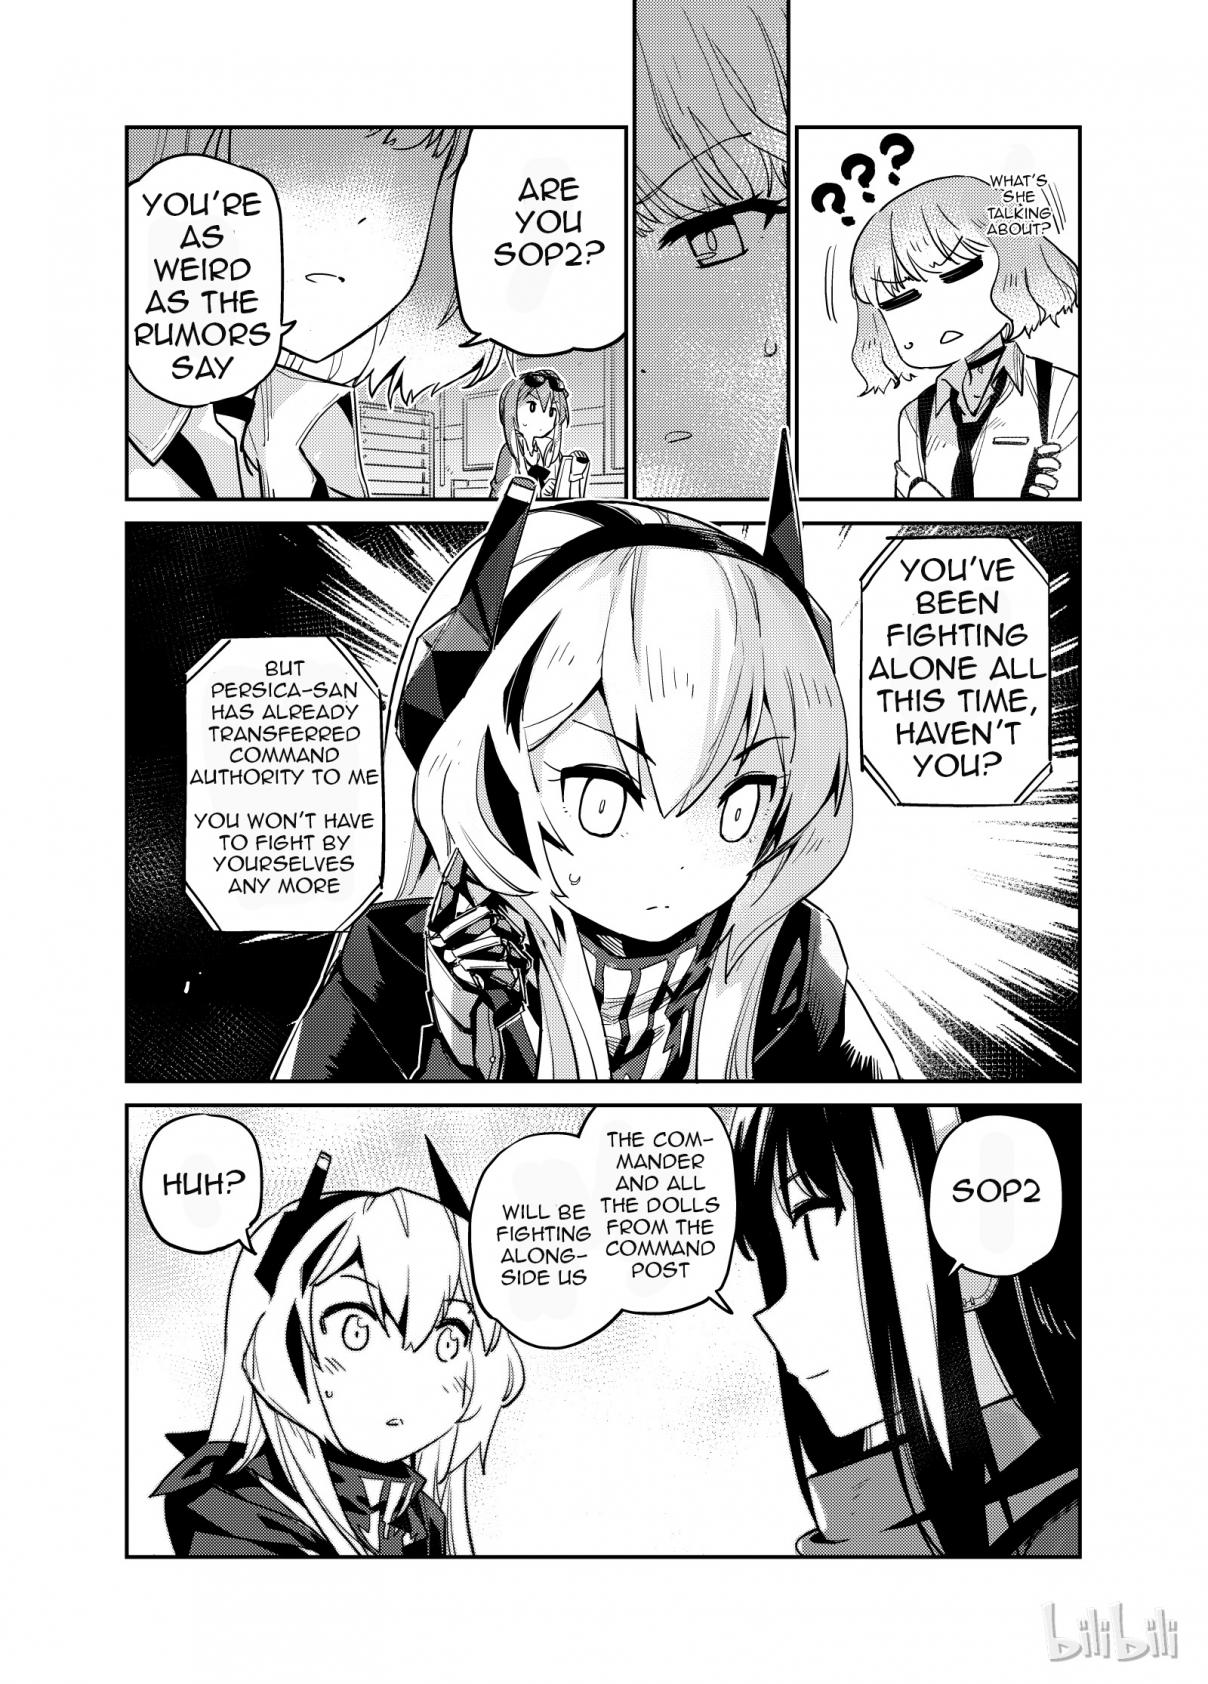 Girls' Frontline Ch. 5 Log. 005 Hound and Friends